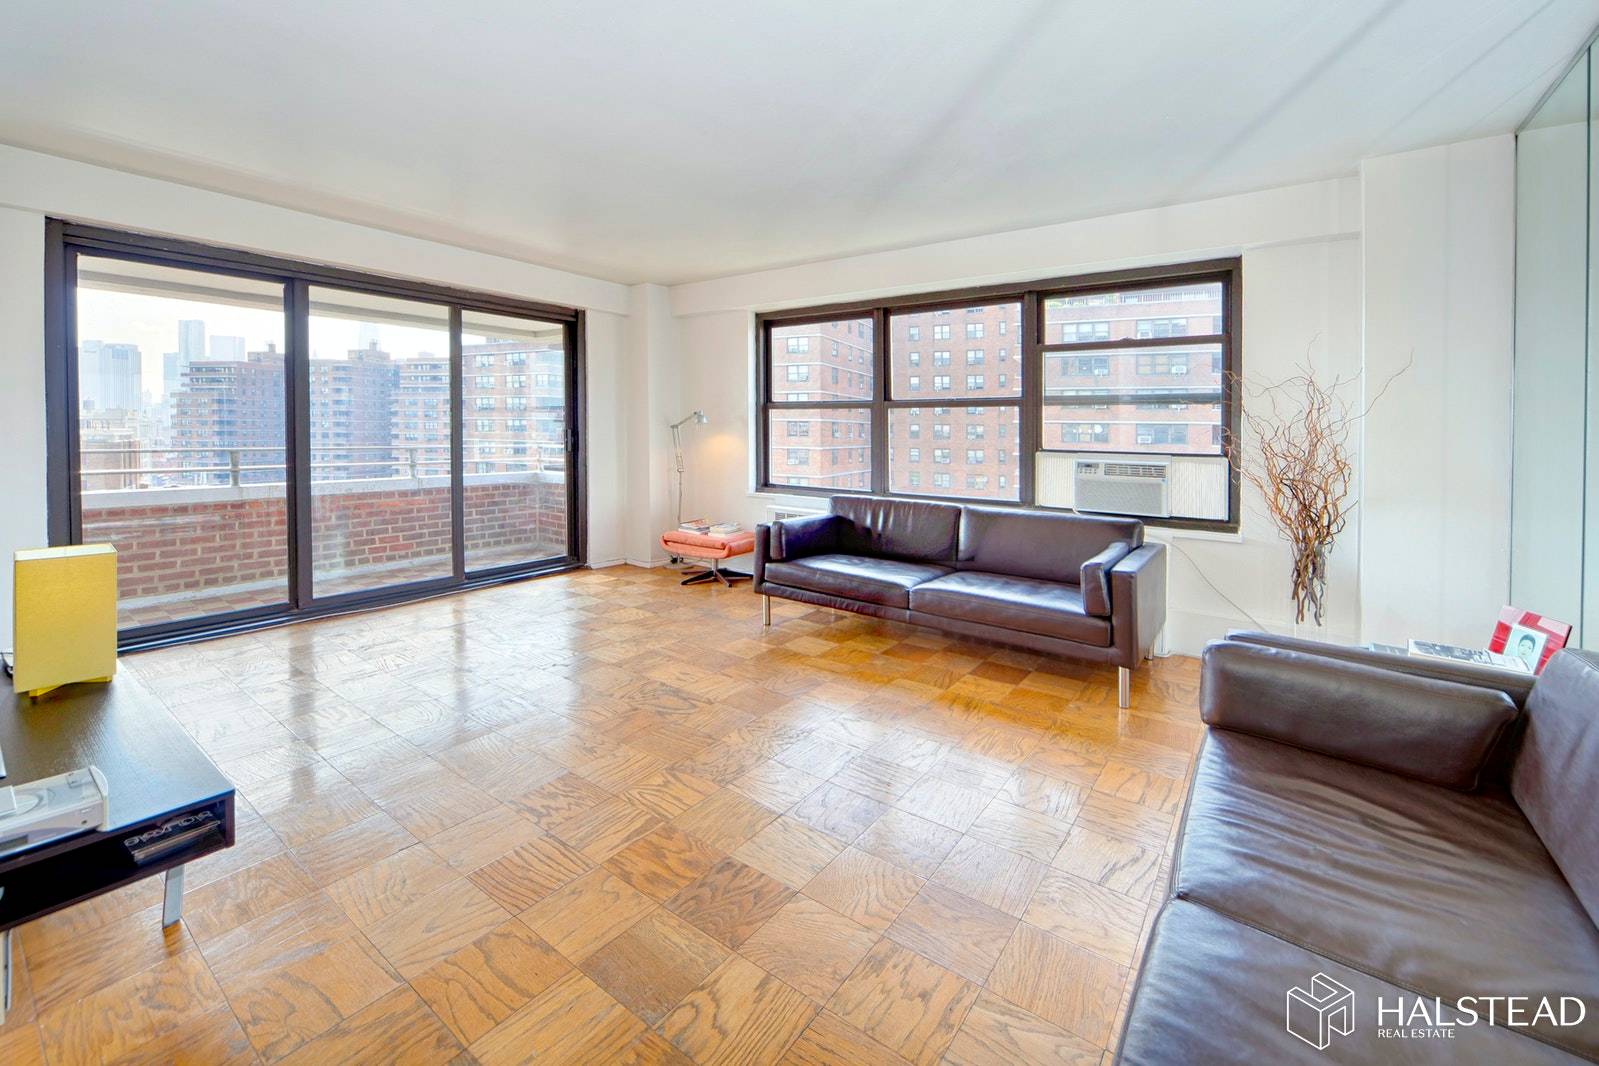 EASY TO SHOW VIA VIDEO, FACETIME OR LEAVING DOOR UNLOCKED FOR A PRIVATE, IN PERSON SHOWINGMuch sought after rare to market corner layout with open views from every room !